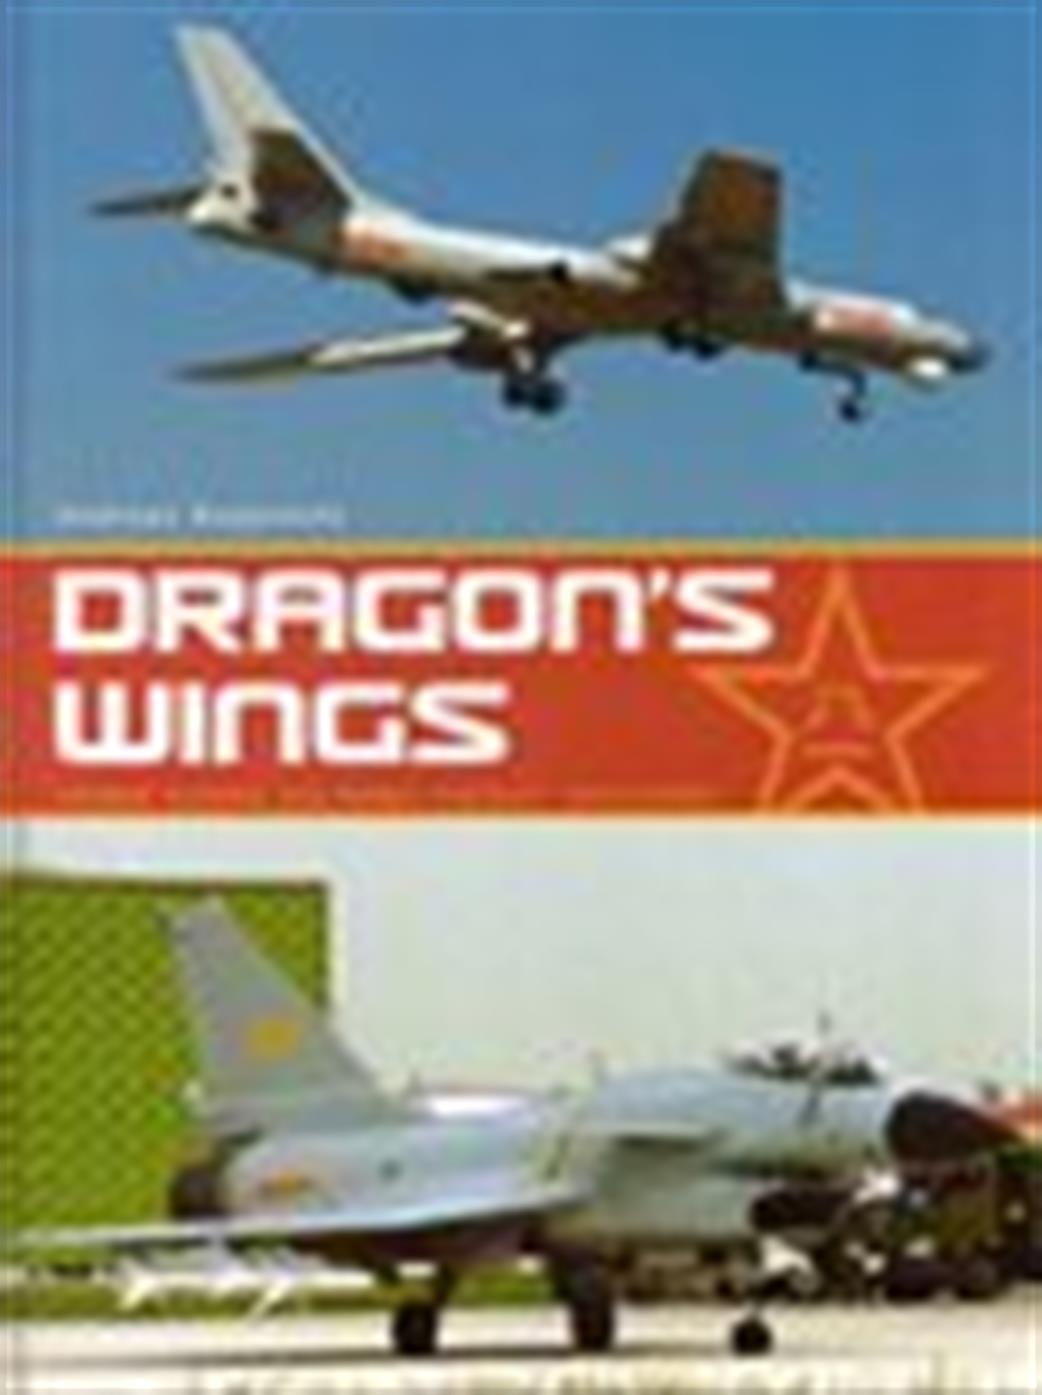 9781906537364 Dragon's Wings Reference Book by Andreas Rupprecht